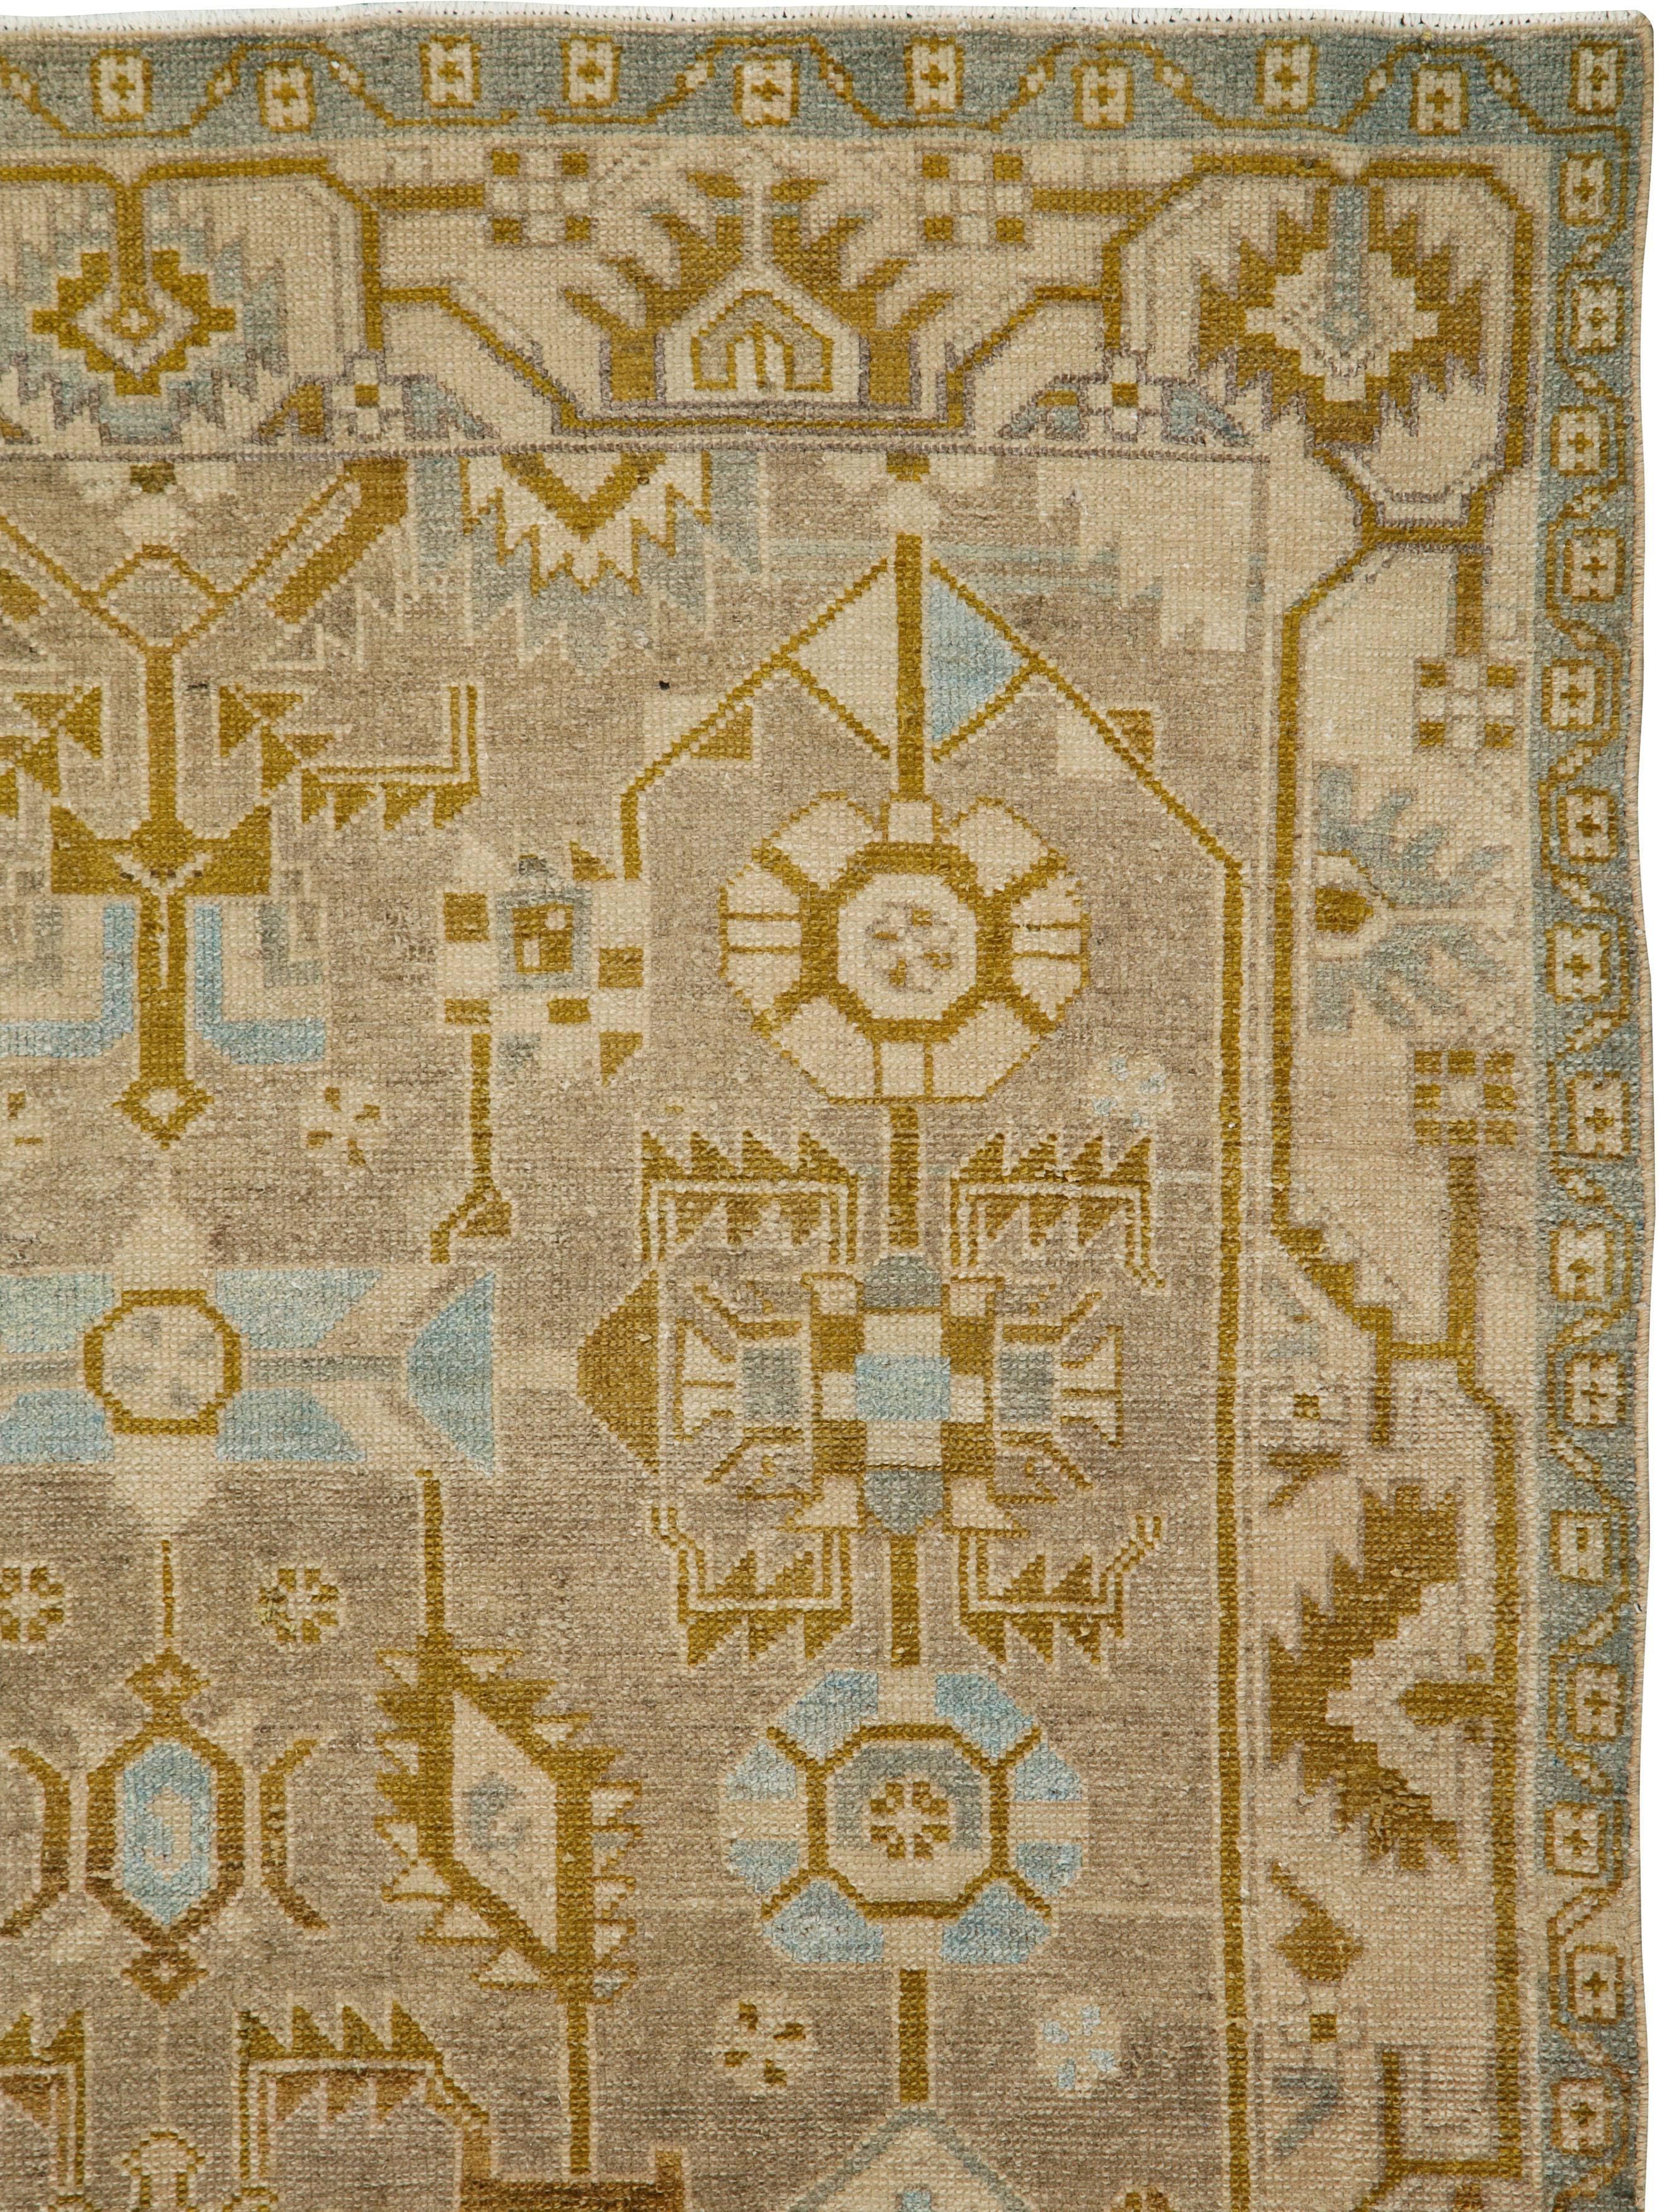 An antique Persian Malayer rug from the early 20th century.